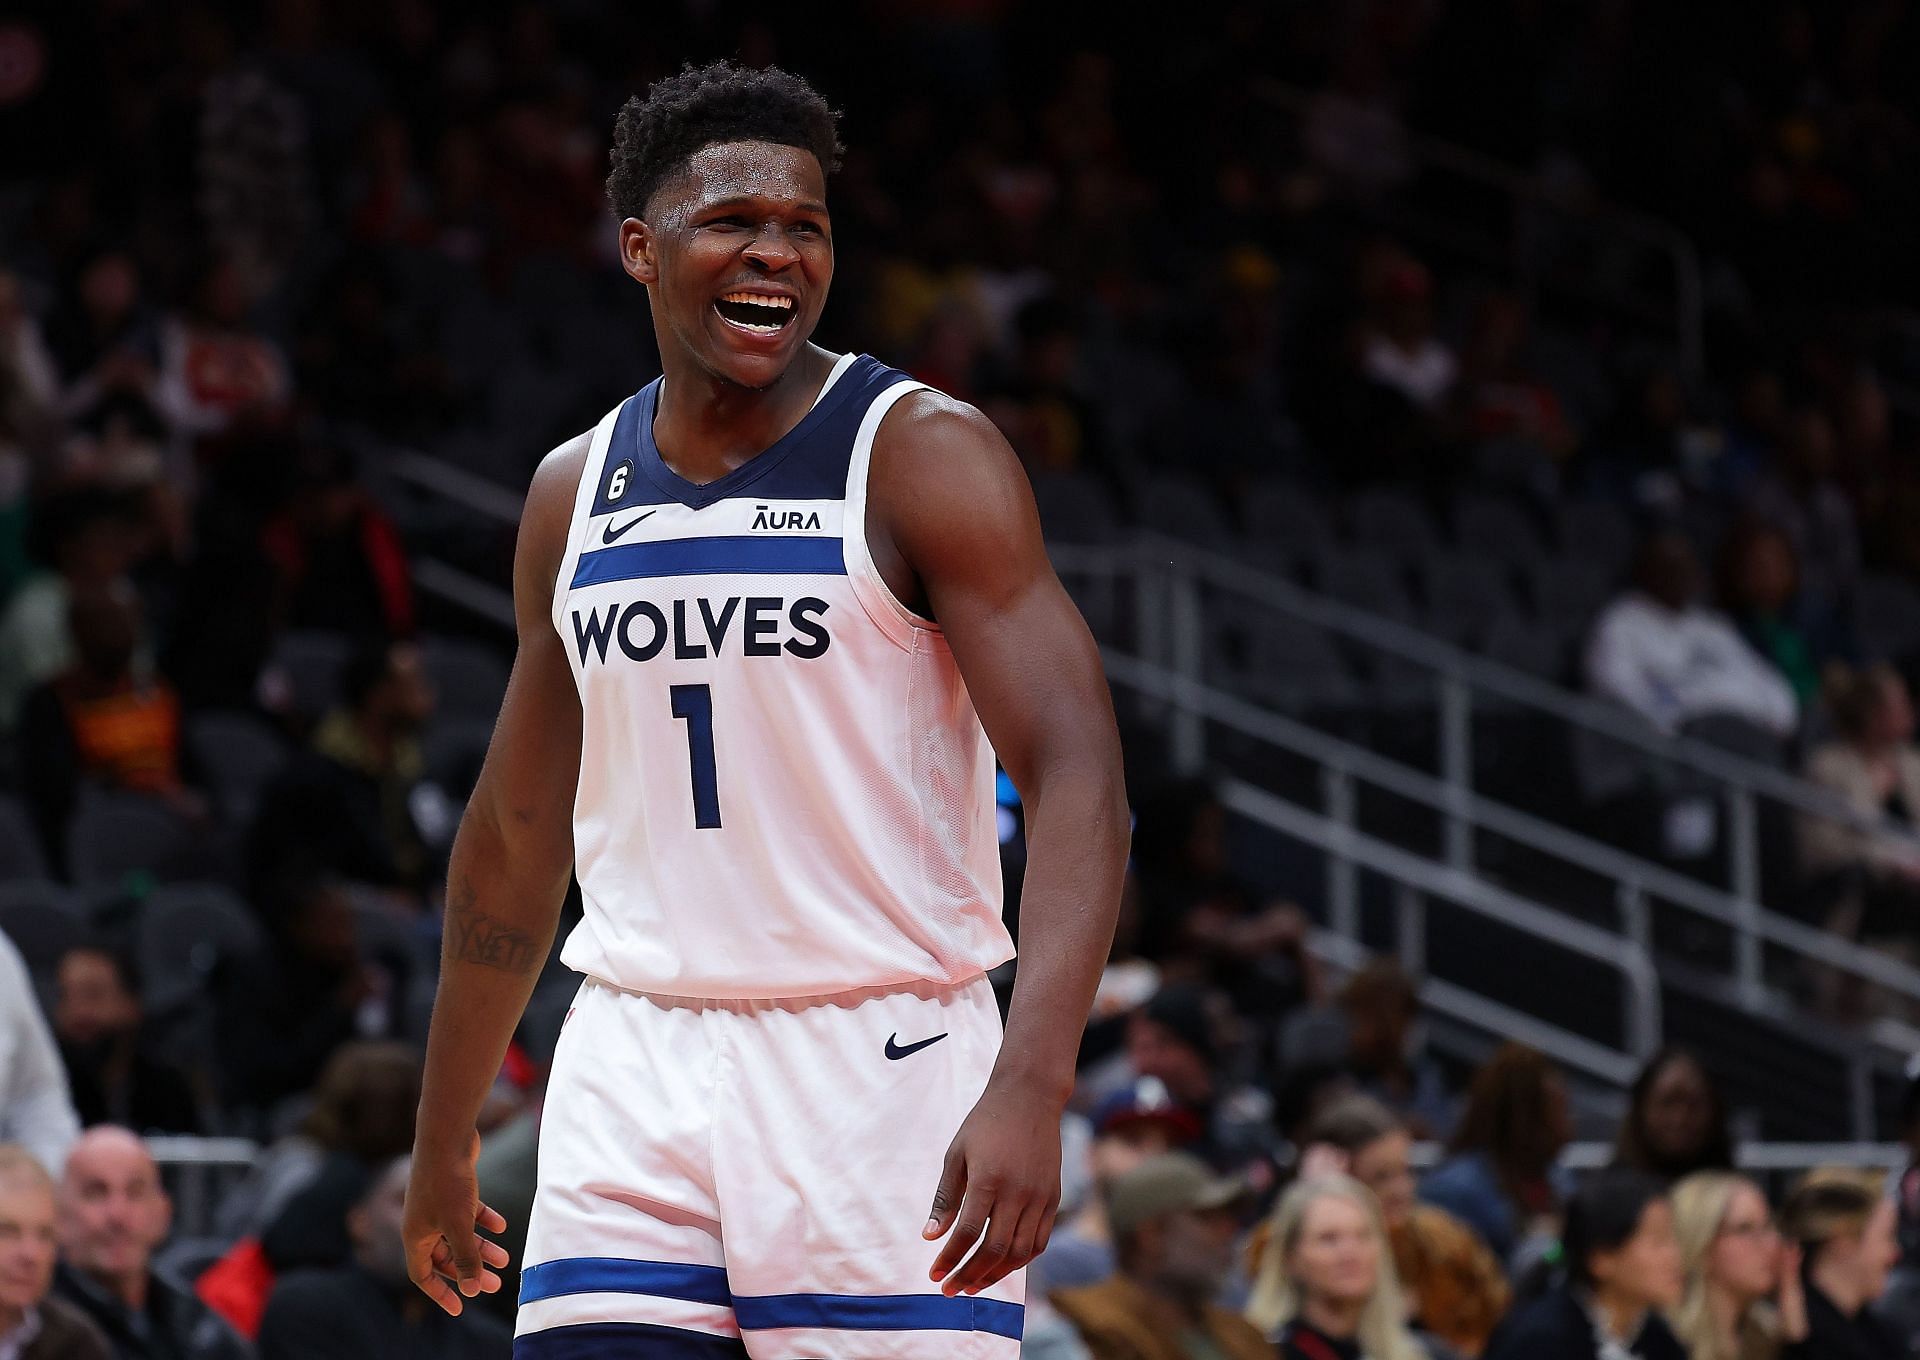 Wolves' Edwards goes off for 10 threes in record-breaking